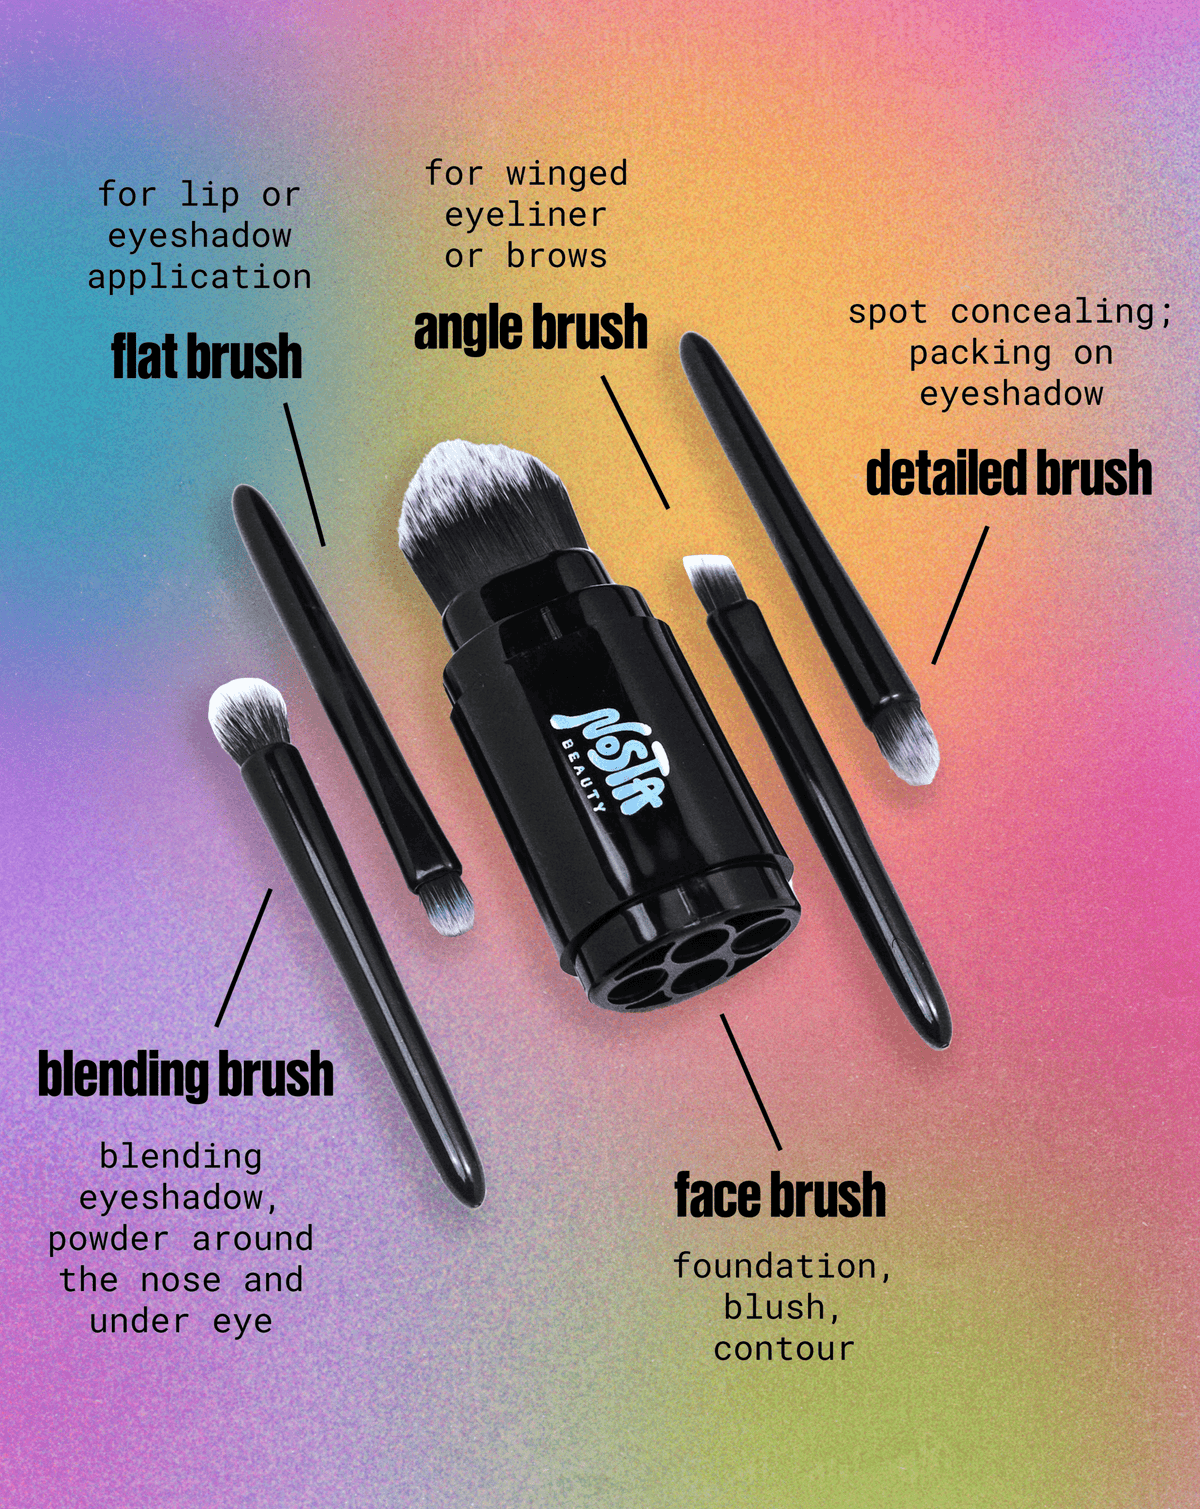 This all in one makeup brush set features a face brush at the top, while the angled, flat, fluffy, and dense brushes are at the bottom.